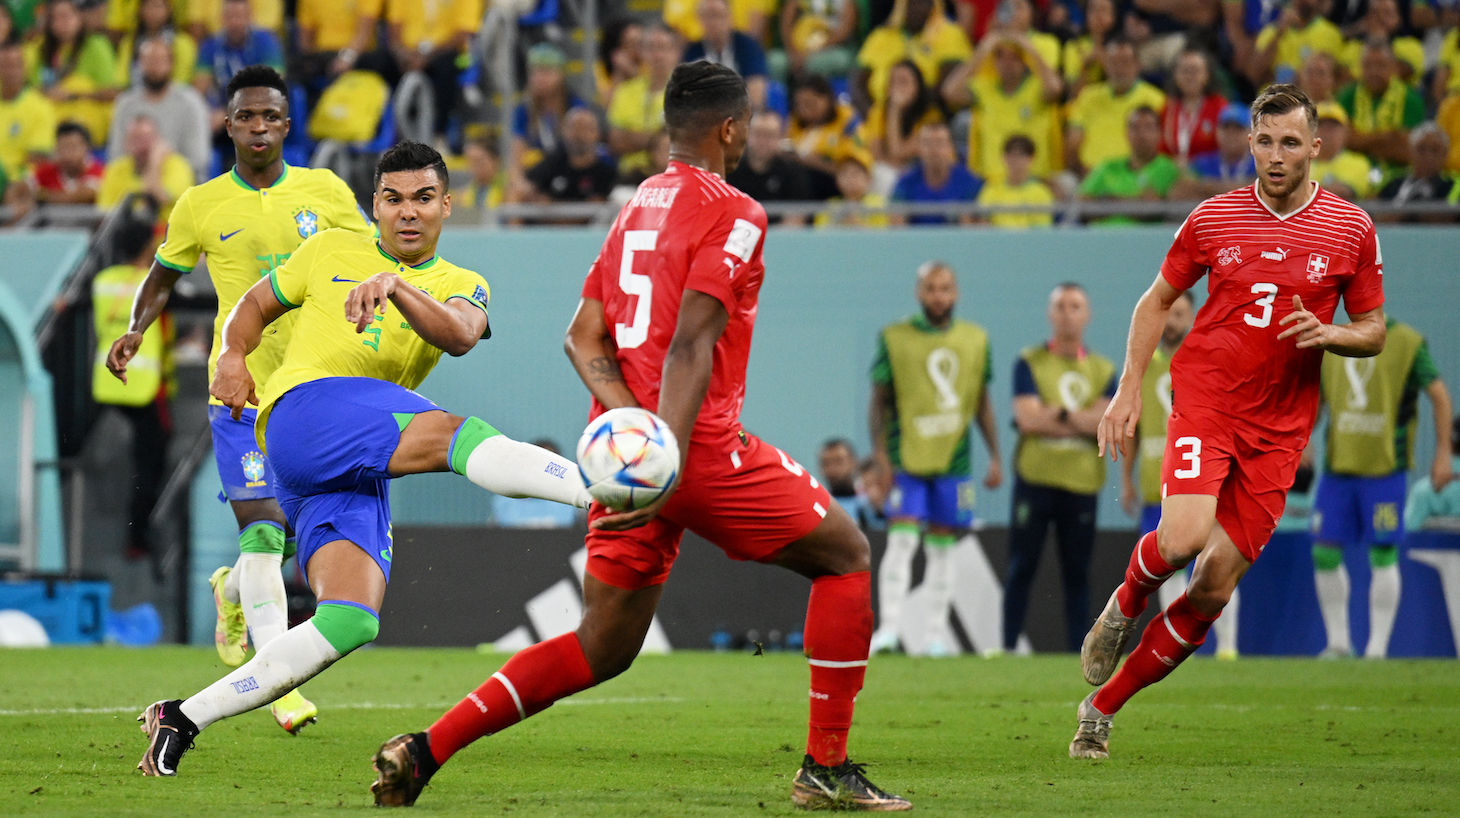 Casemiro of Brazil scores their team's first goal during the FIFA World Cup Qatar 2022 Group G match between Brazil and Switzerland at Stadium 974 on November 28, 2022 in Doha, Qatar.